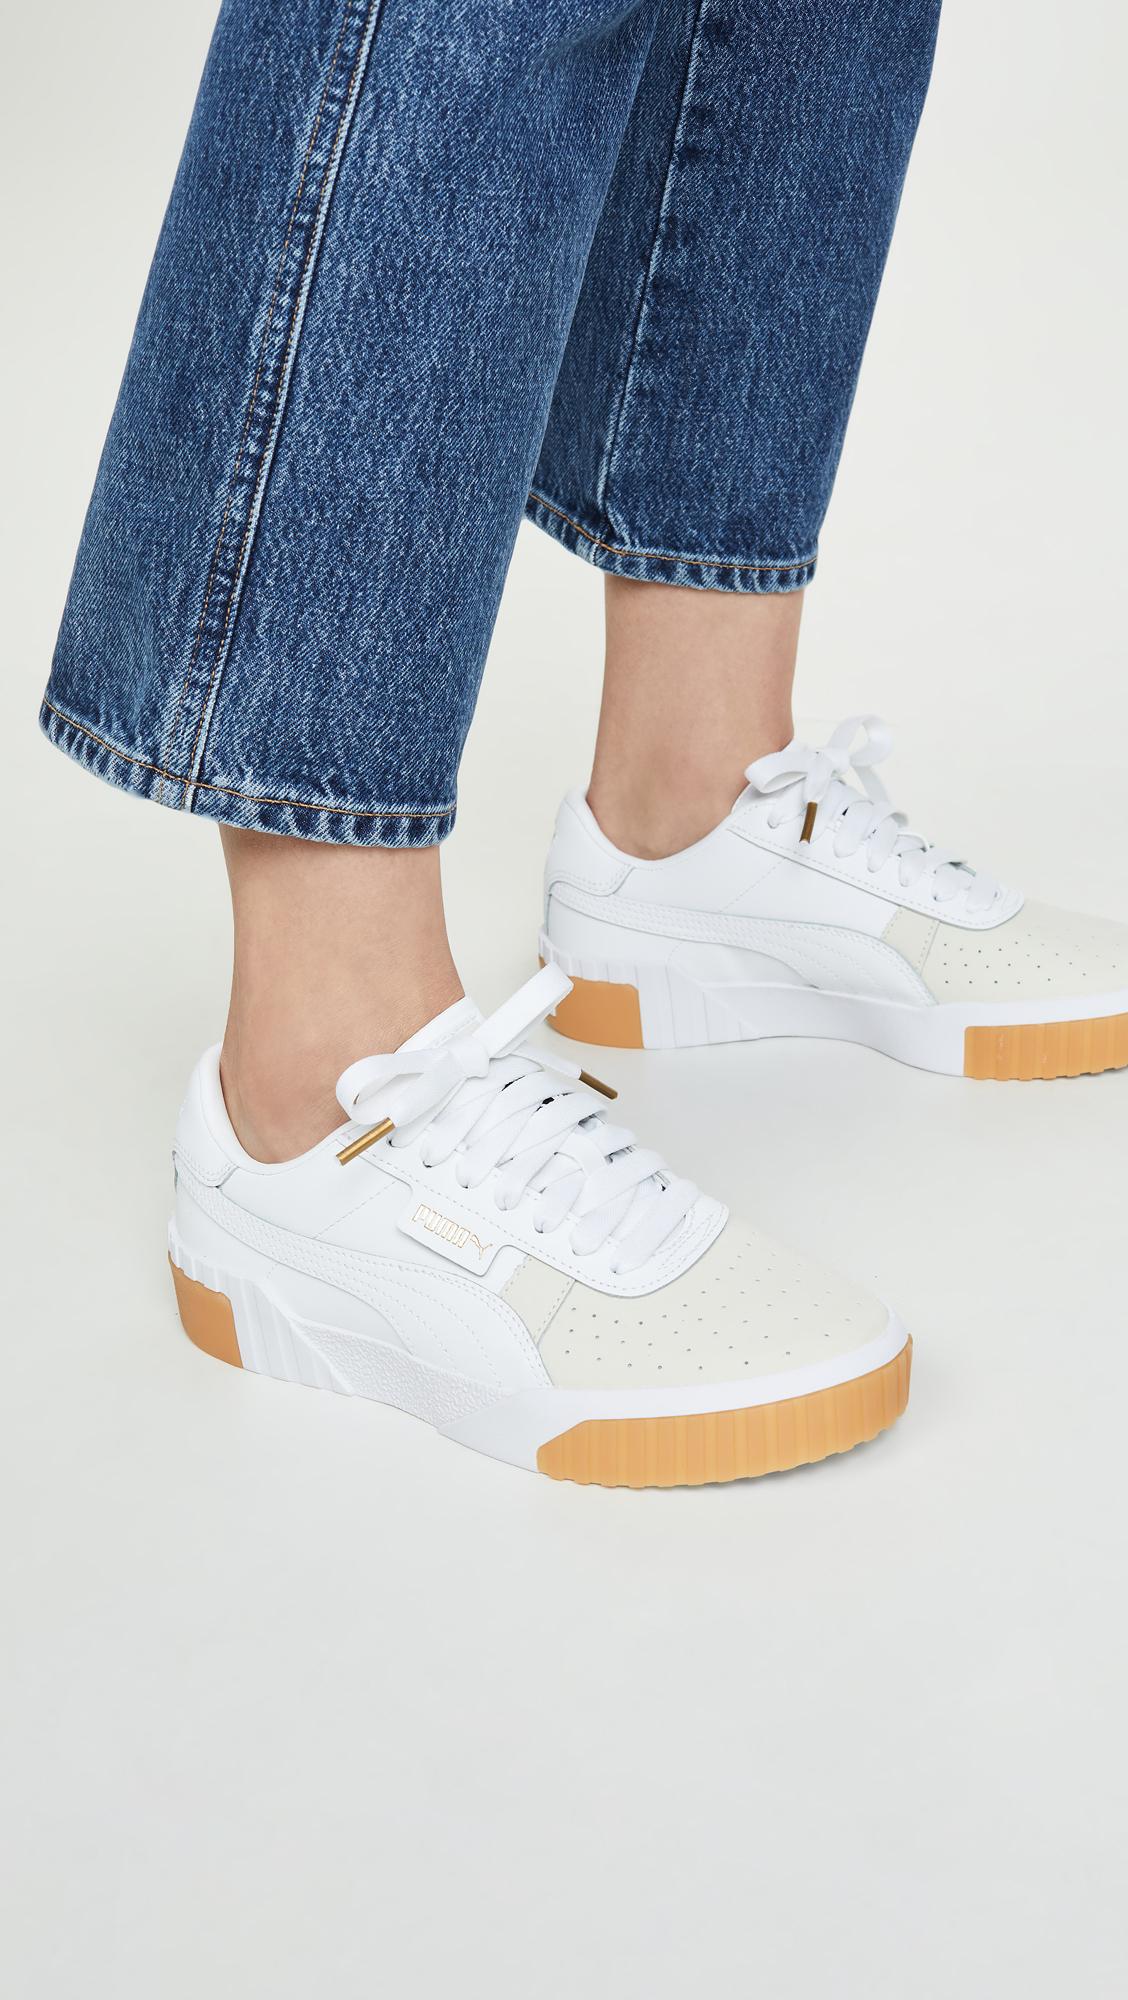 PUMA Leather Cali Exotic Sneakers in White | Lyst